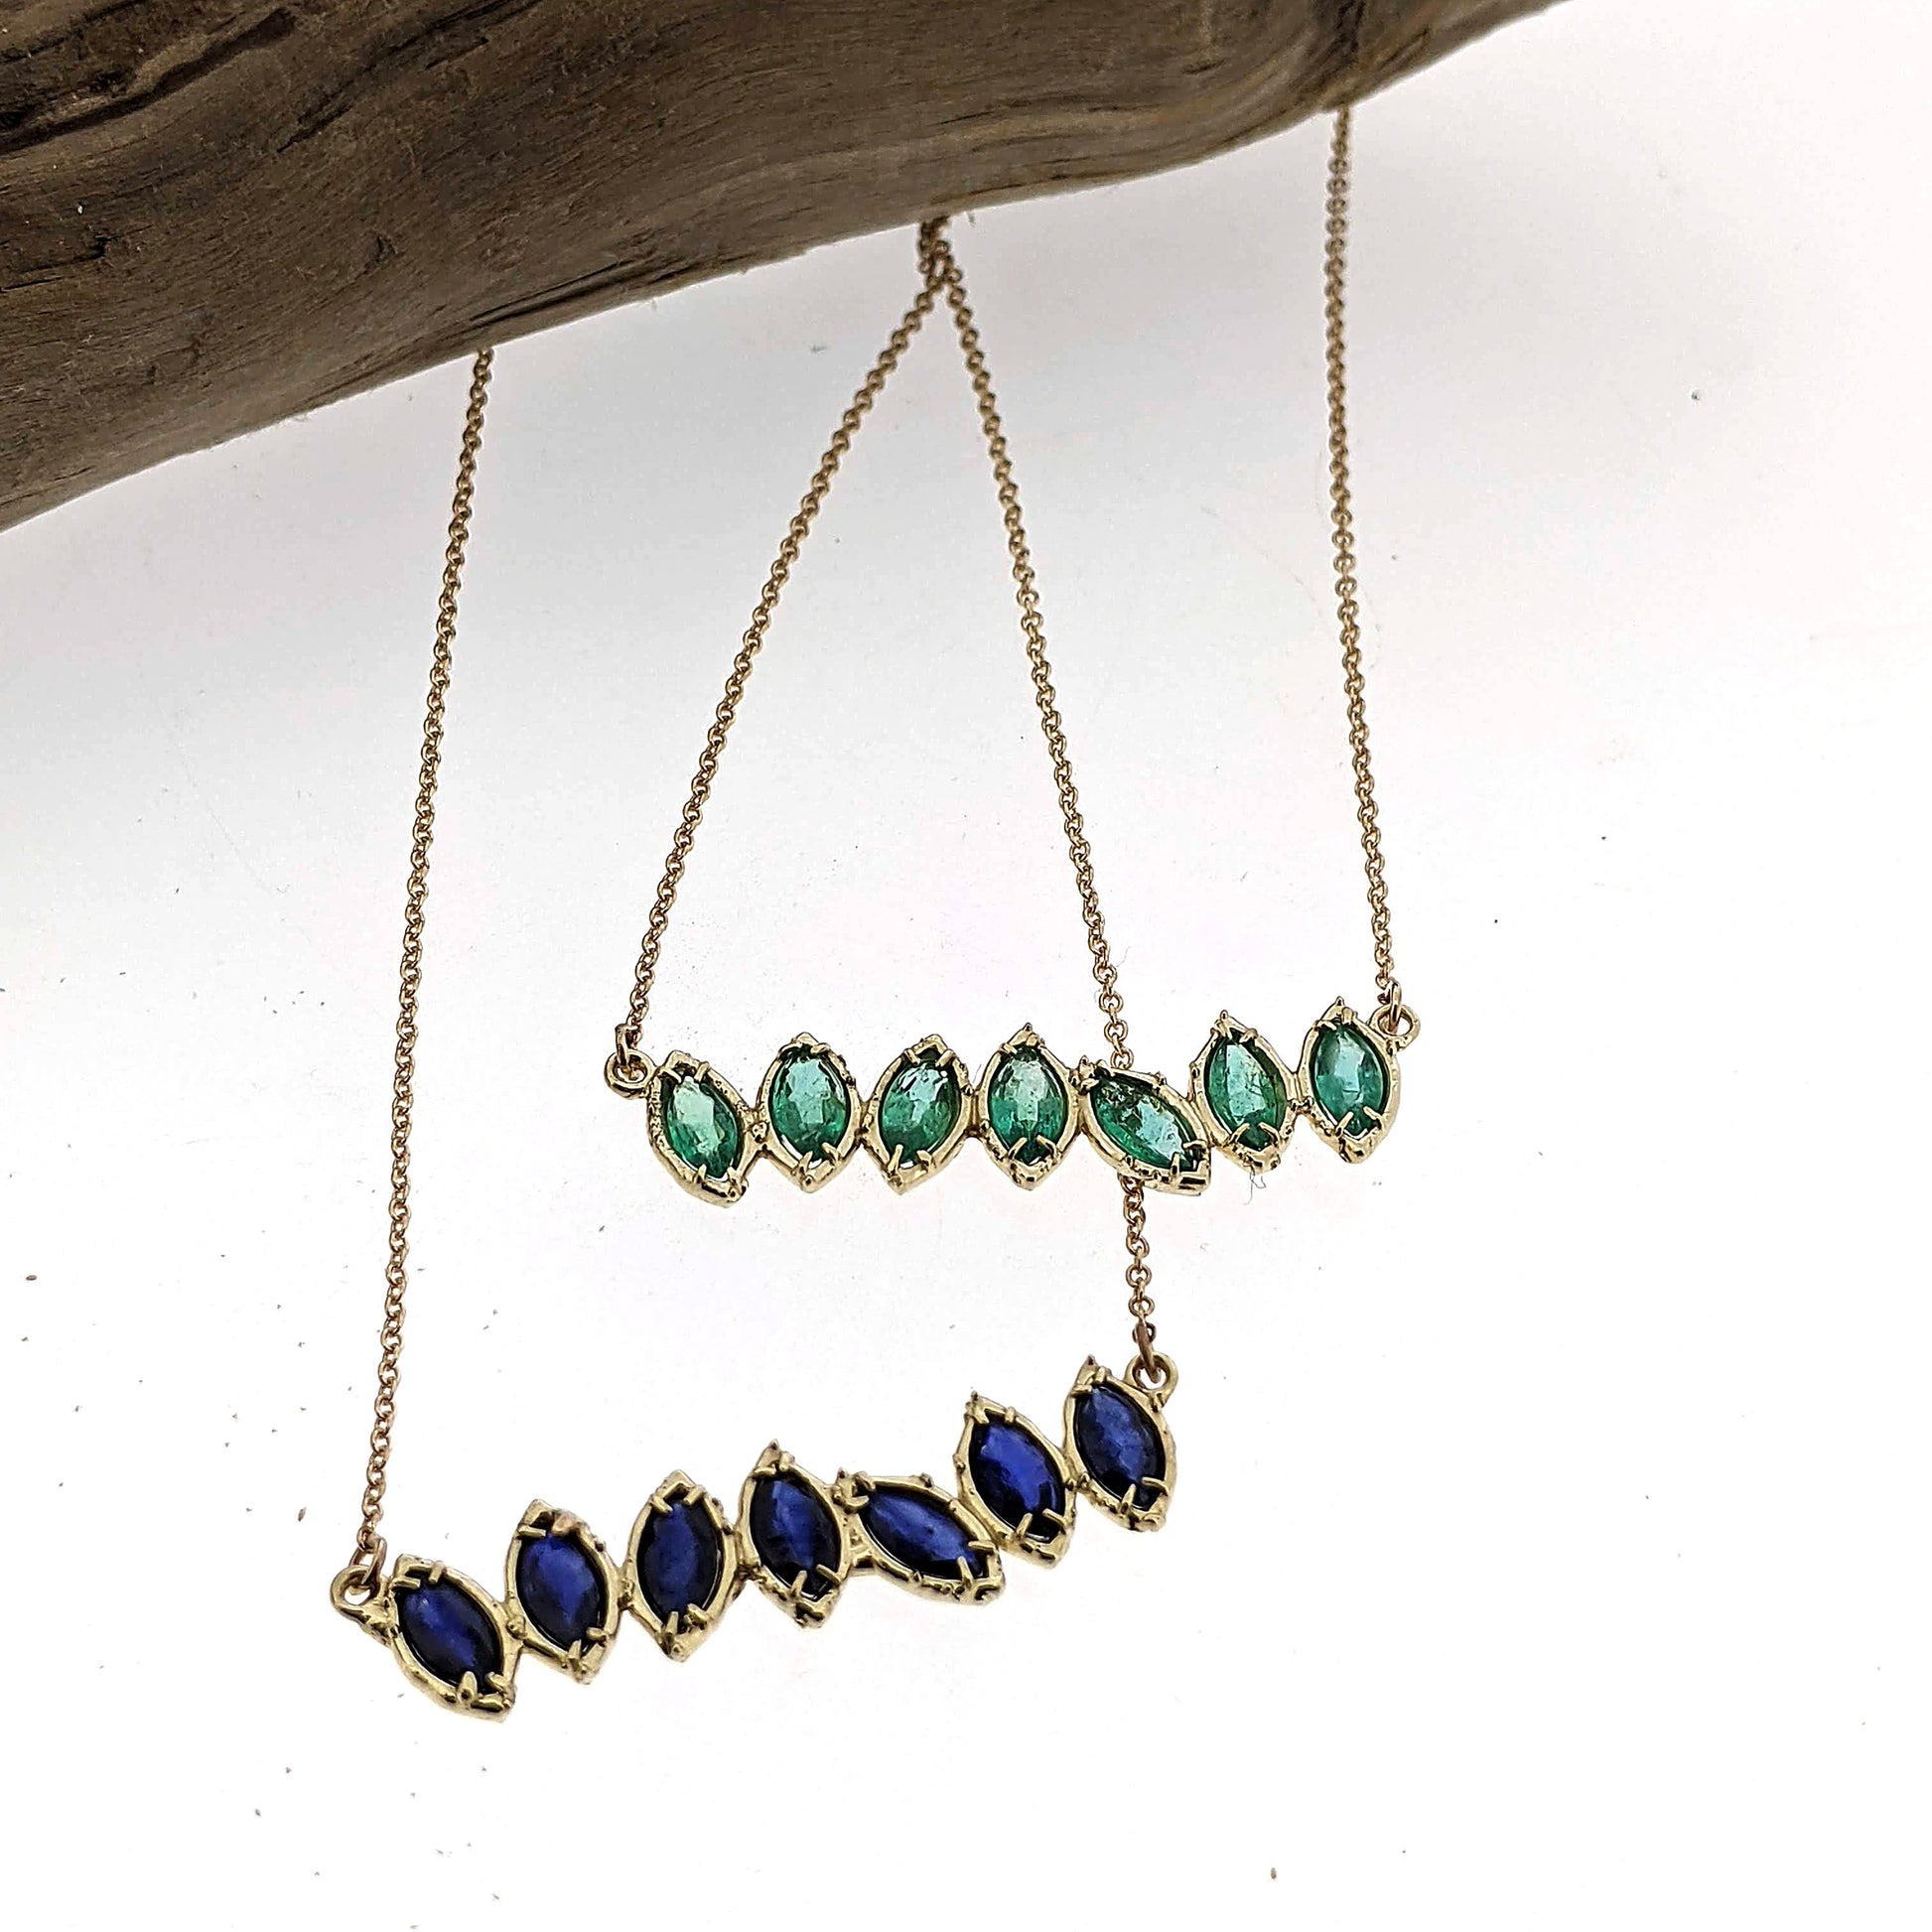 Close up view of pendants on sapphire blue and peridot Cherin Necklace with stick in background.